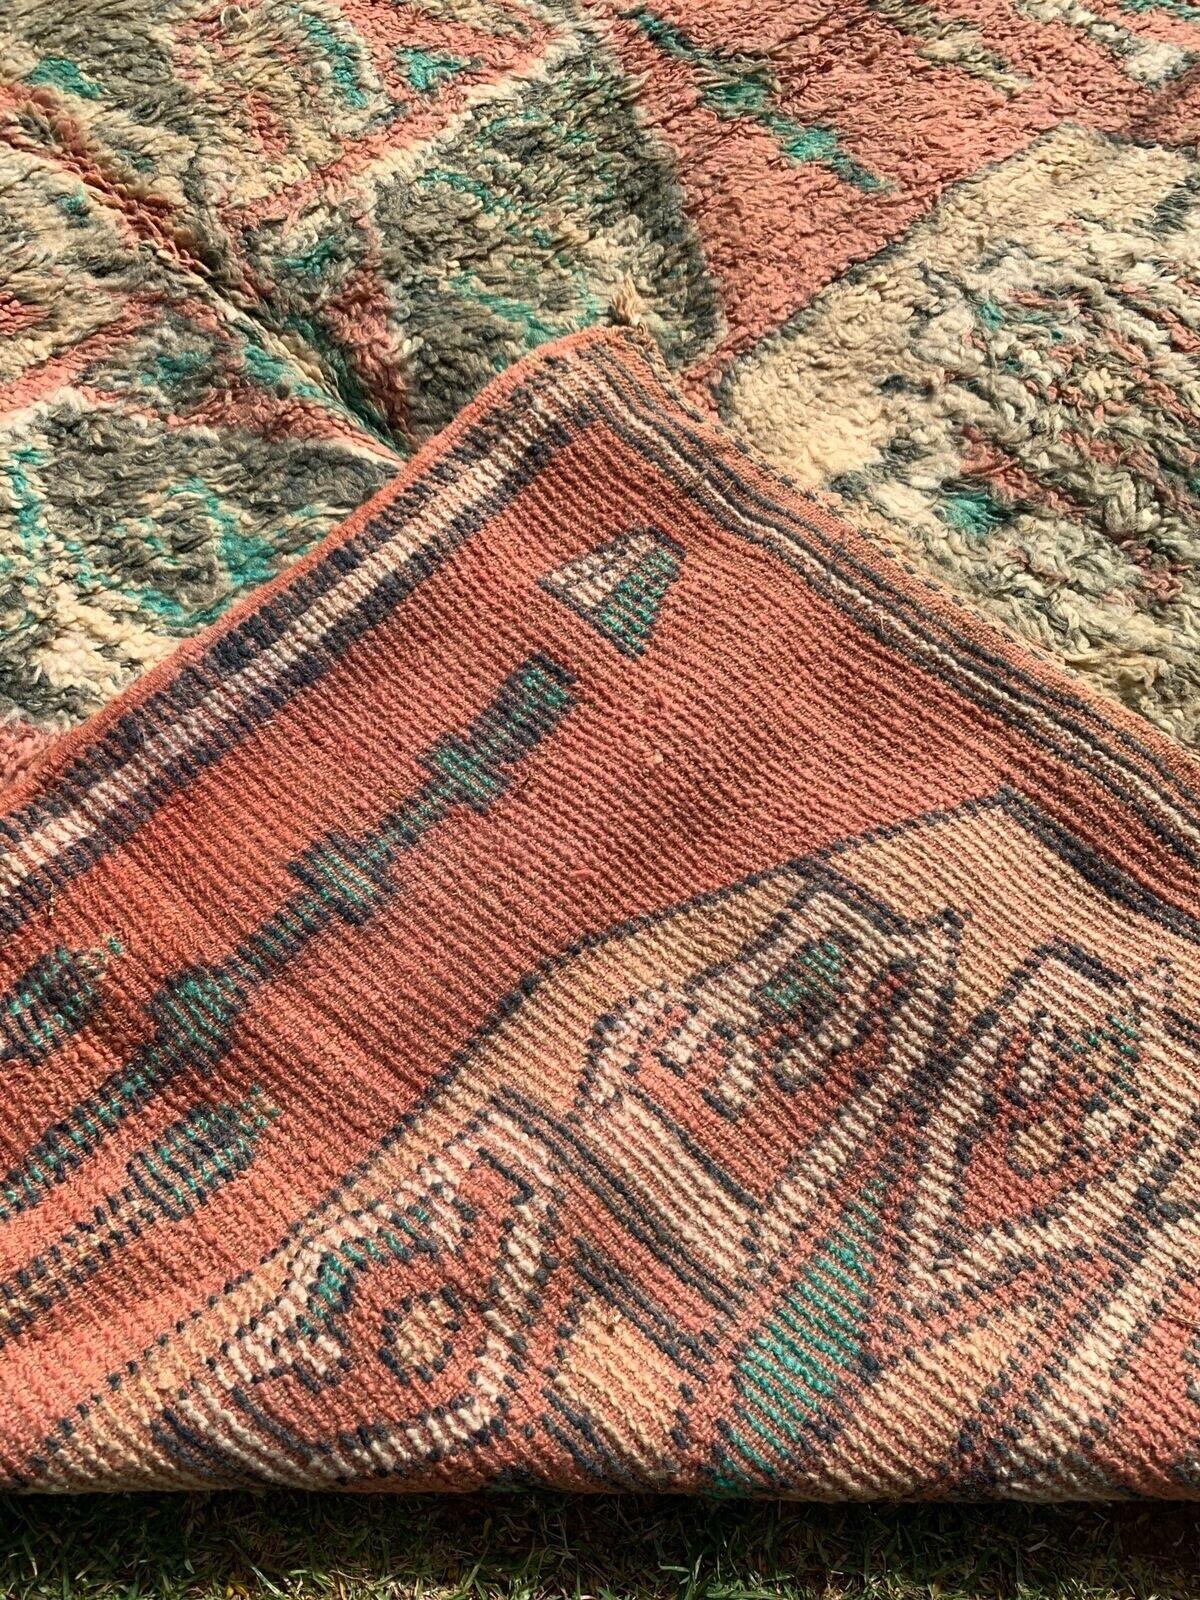 Late 20th Century Handmade Vintage Moroccan Berber Red Rug 5.5' x 10', 1990s - 1G07 For Sale